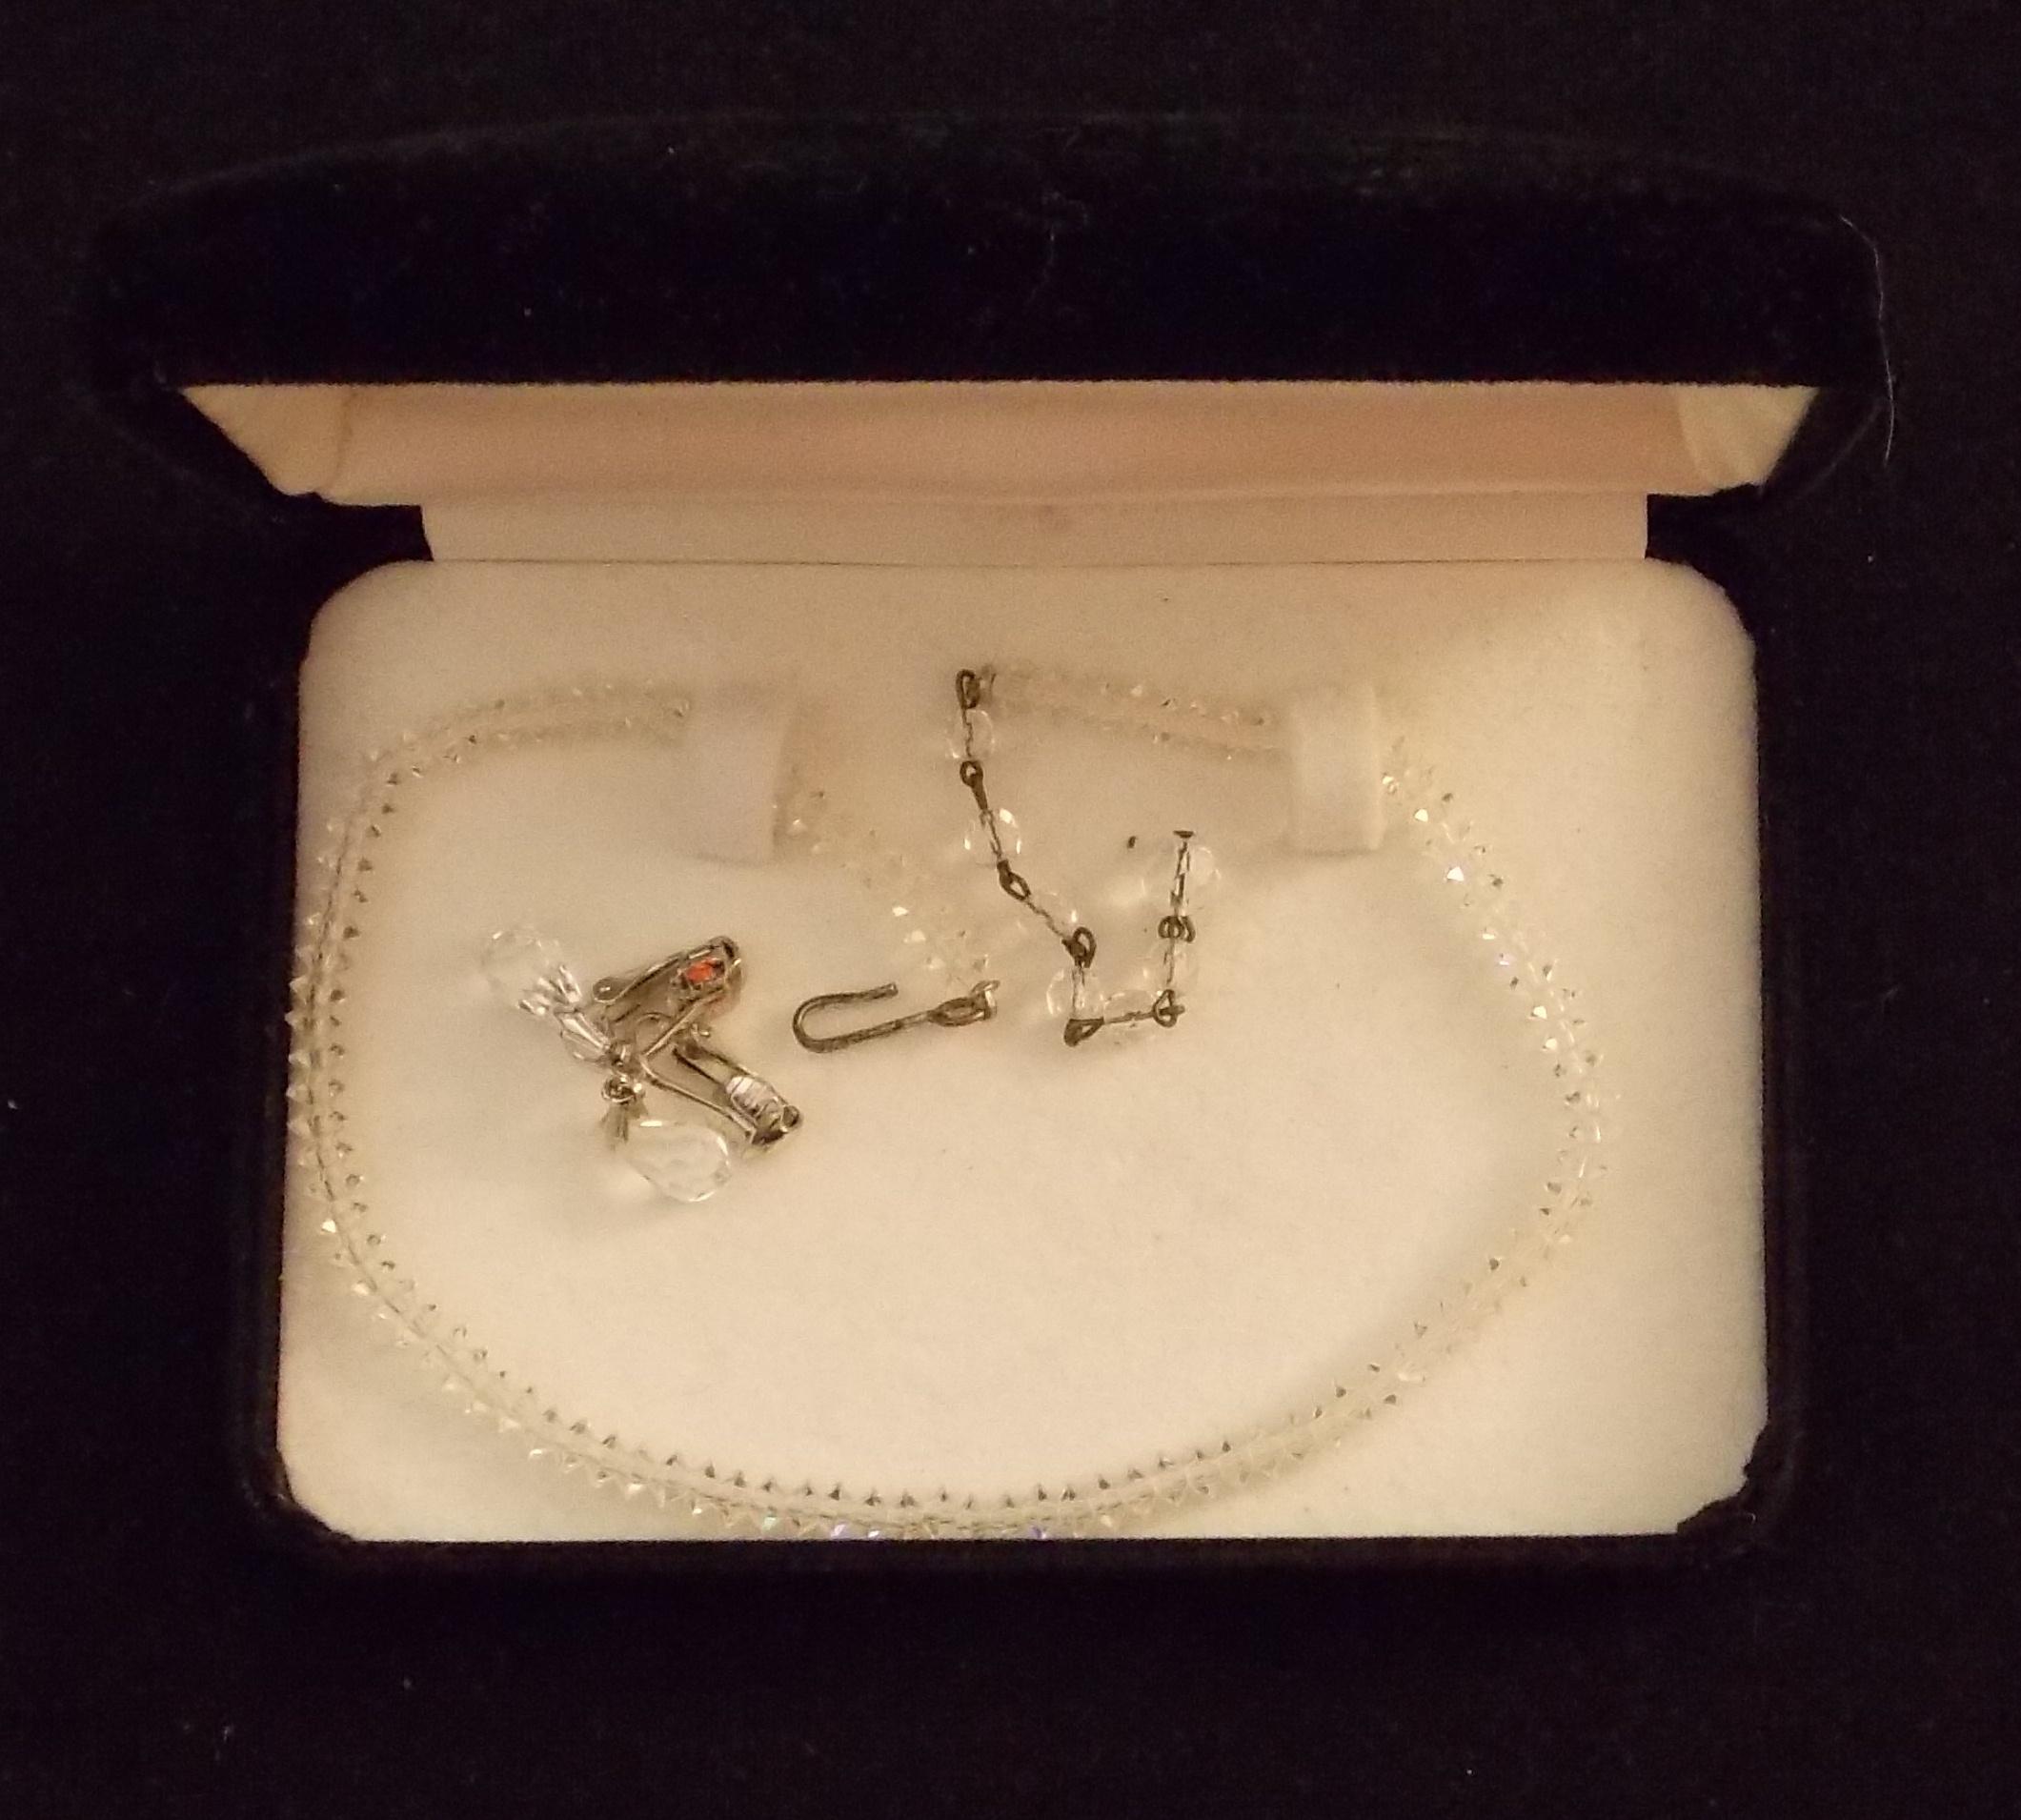 Vintage Necklace and Earring Set with Swarovski Crystal in Box